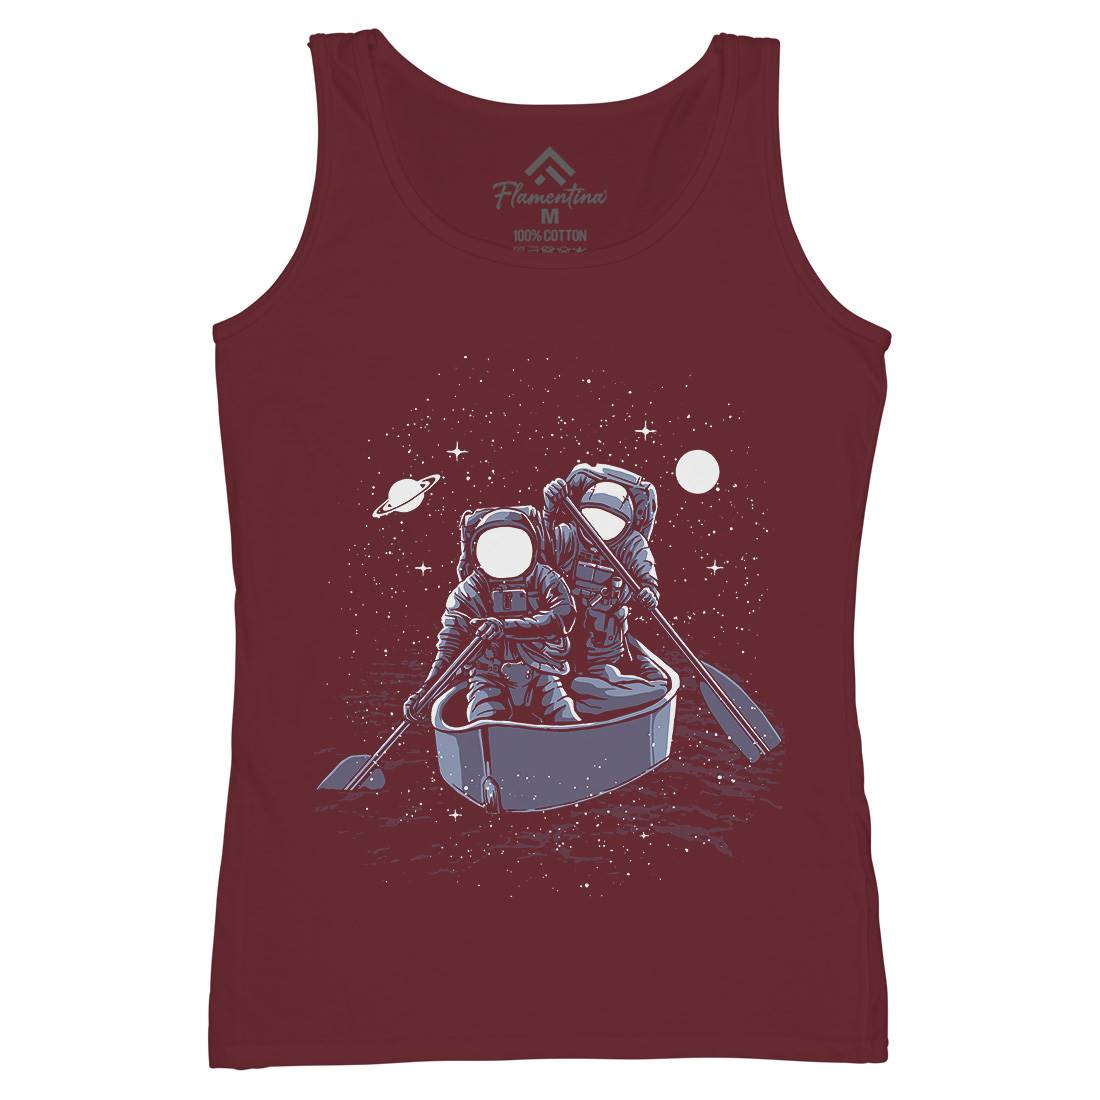 Across The Galaxy Womens Organic Tank Top Vest Space A501